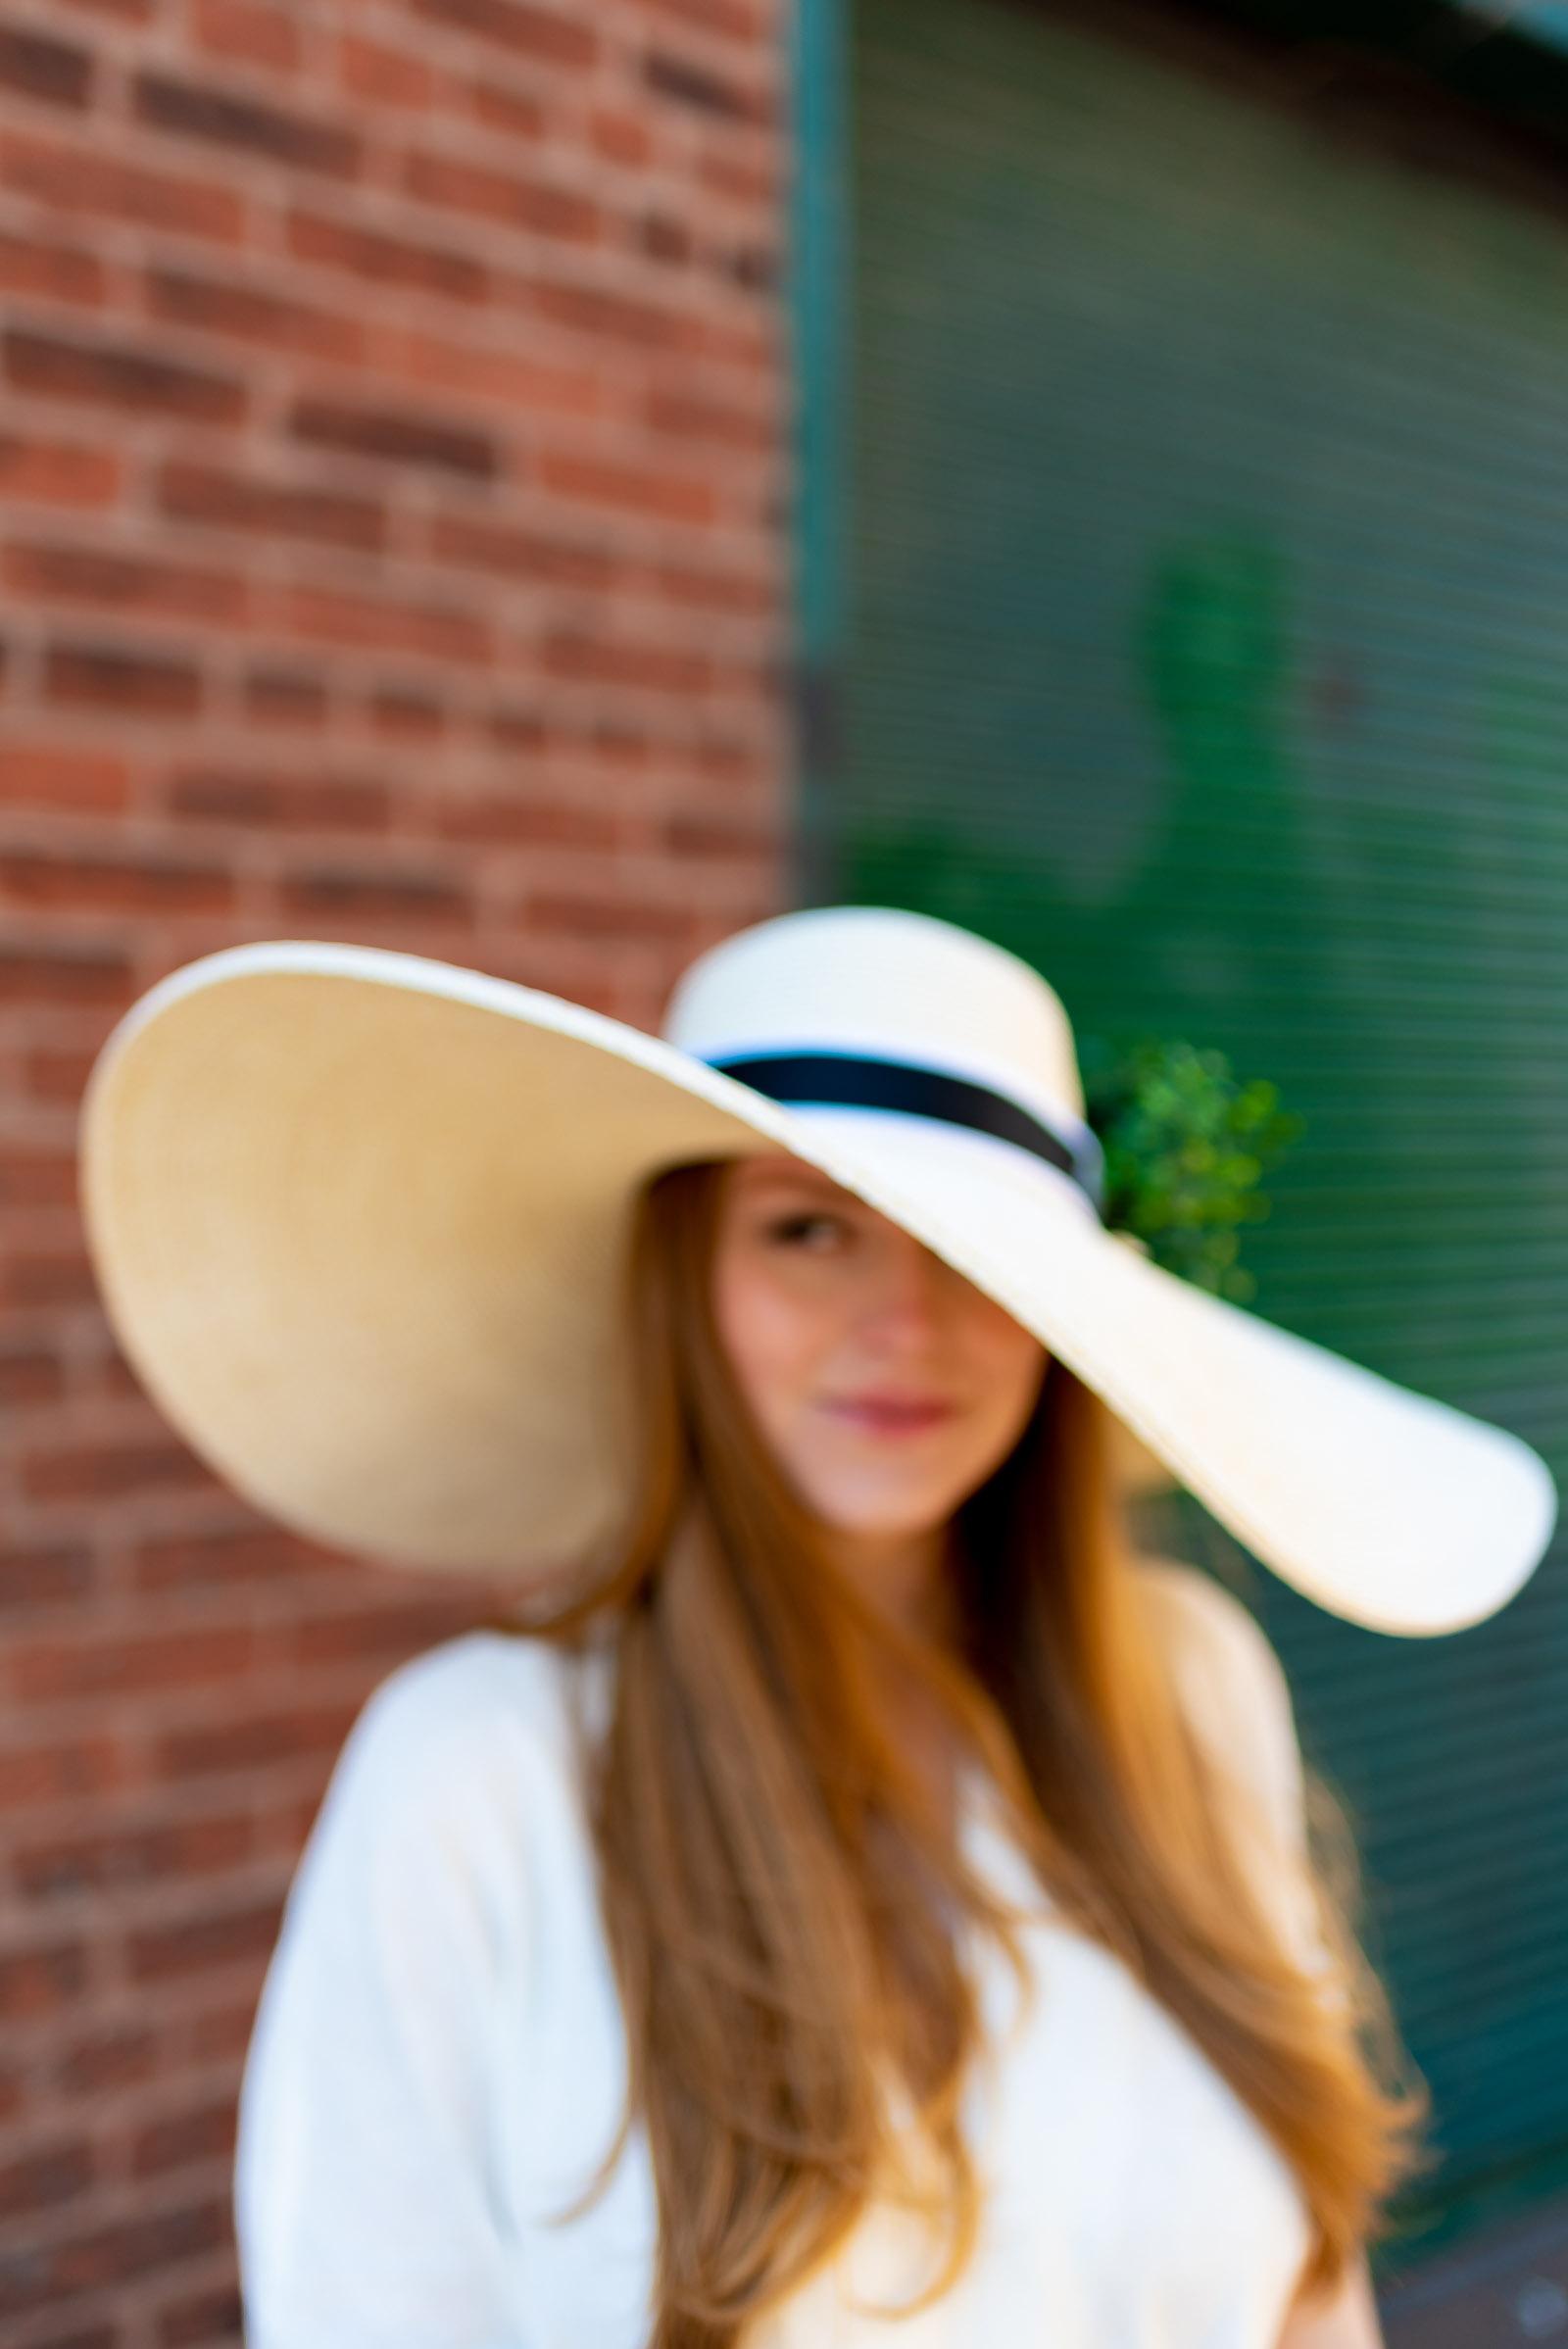 Kentucky Derby Classic Style Inspiration